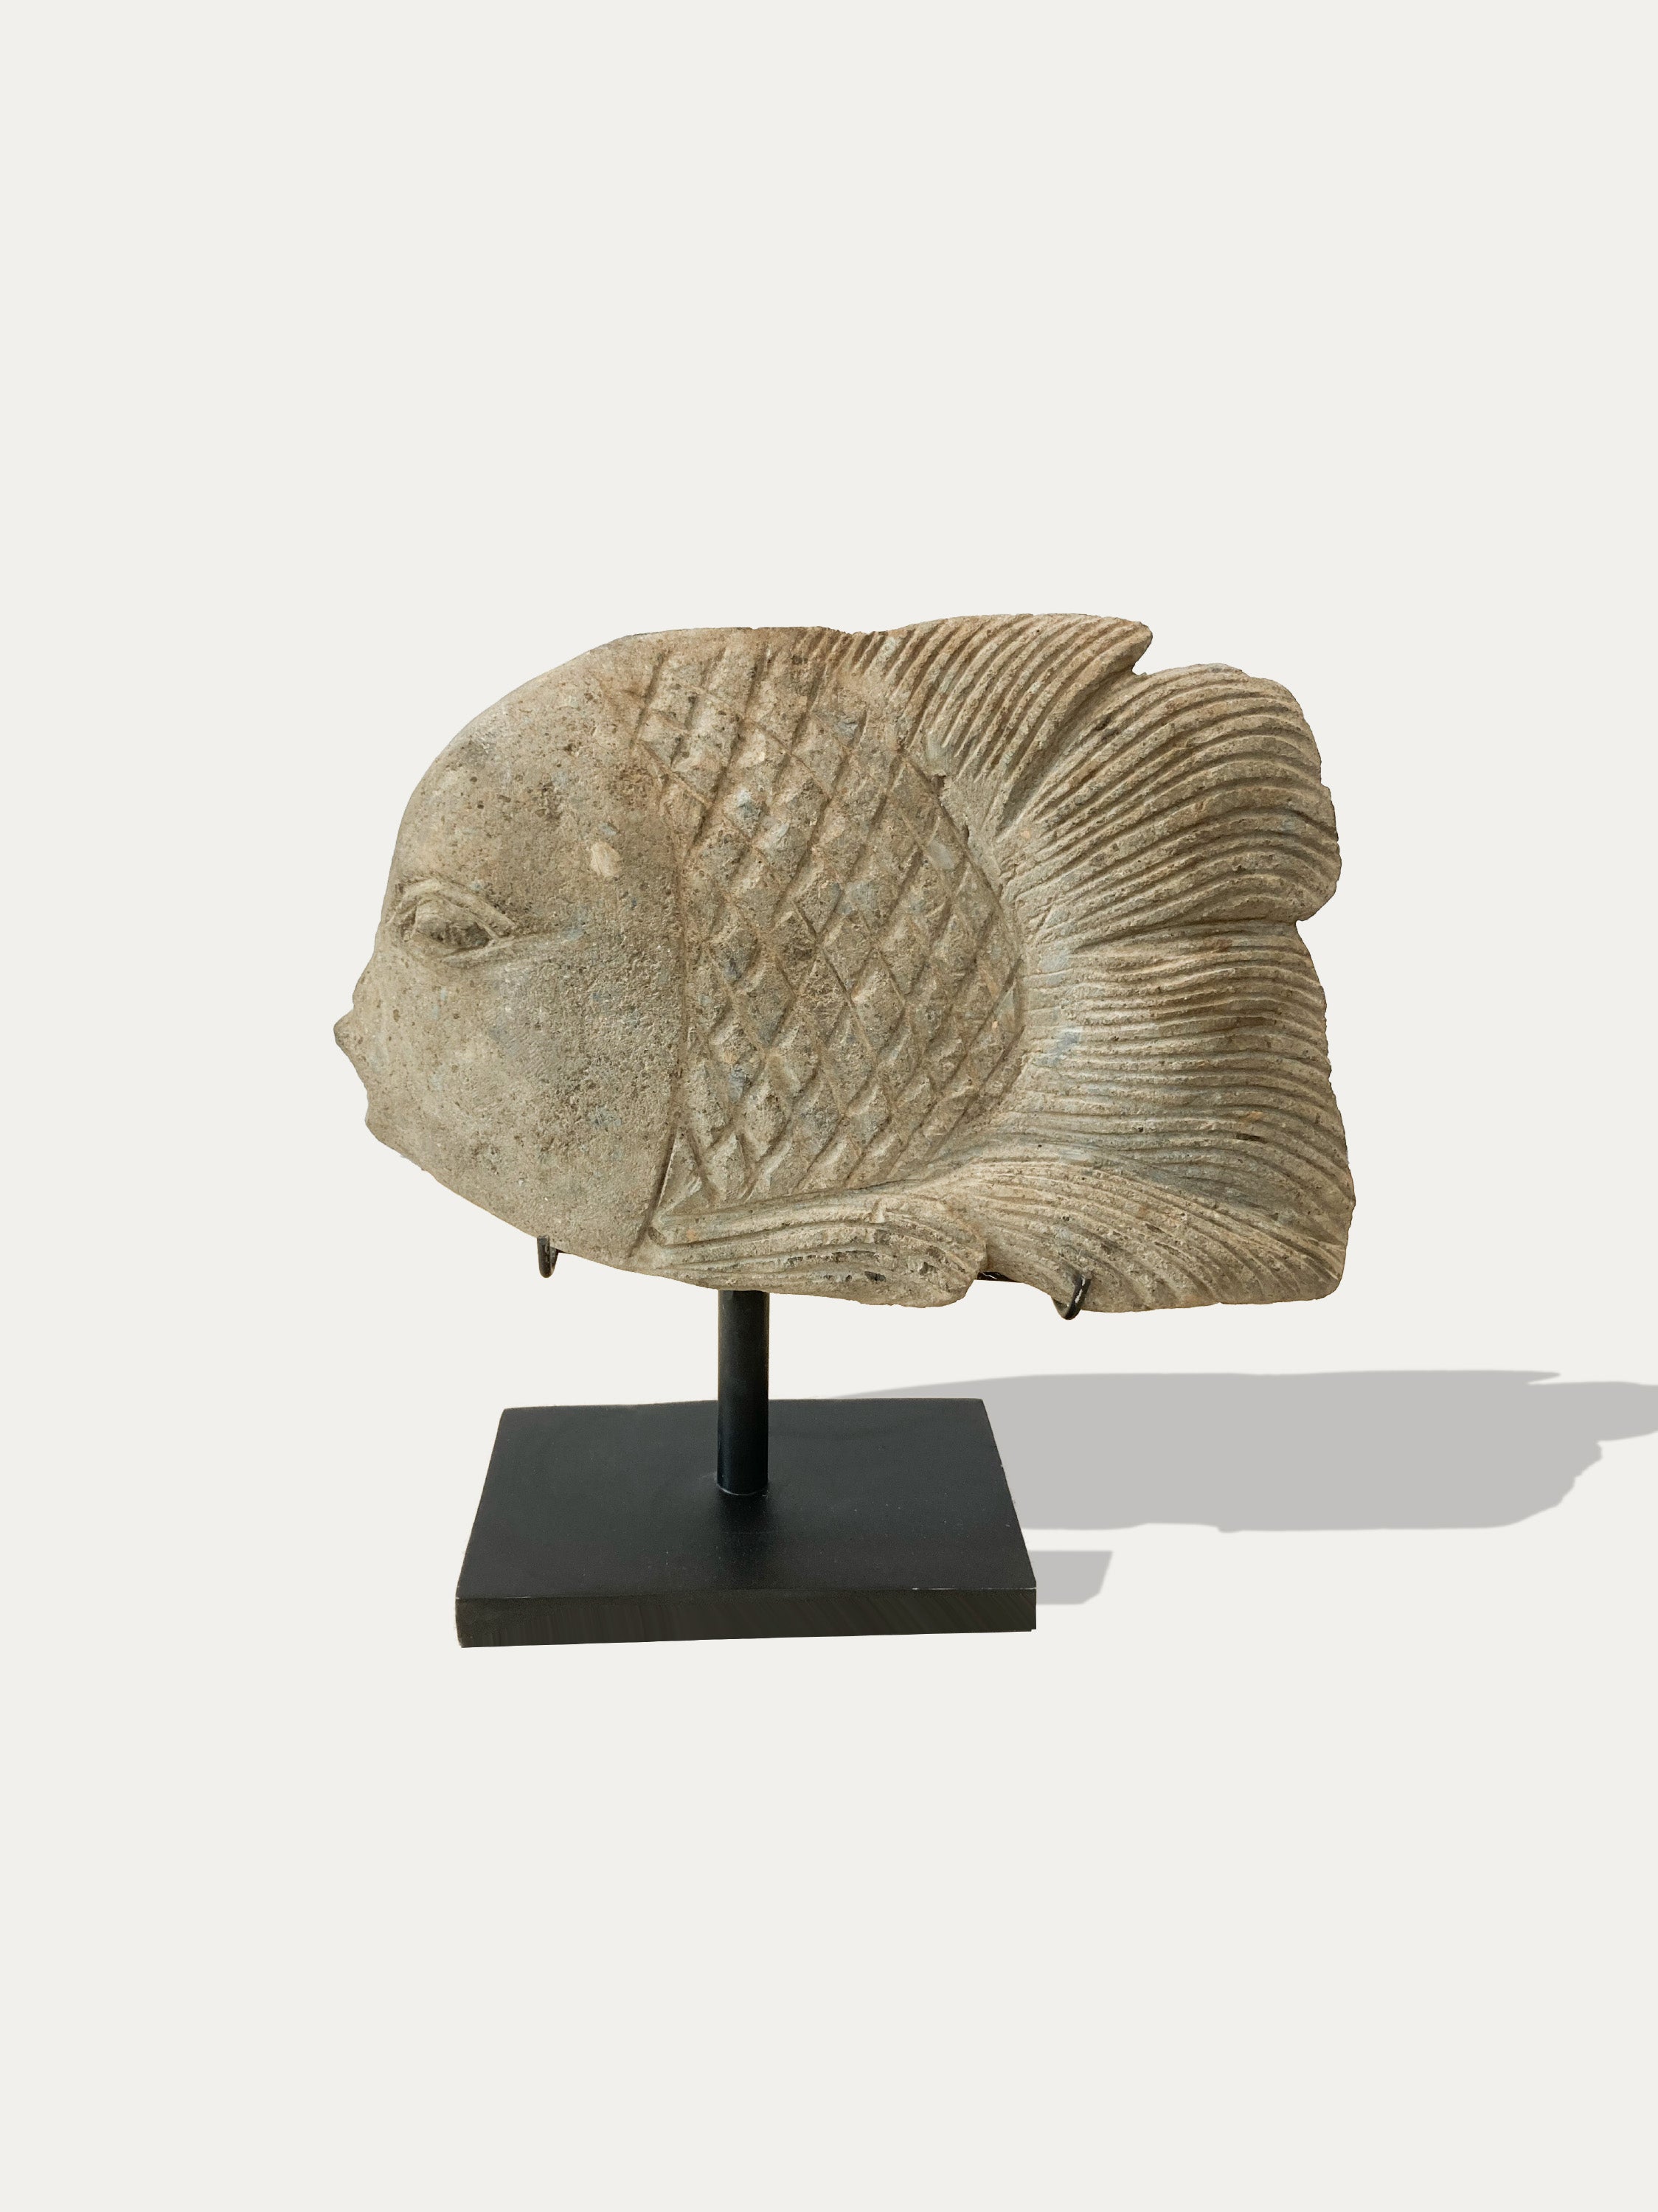 ikan stone fish statue from Java - Asian Art from kirschon